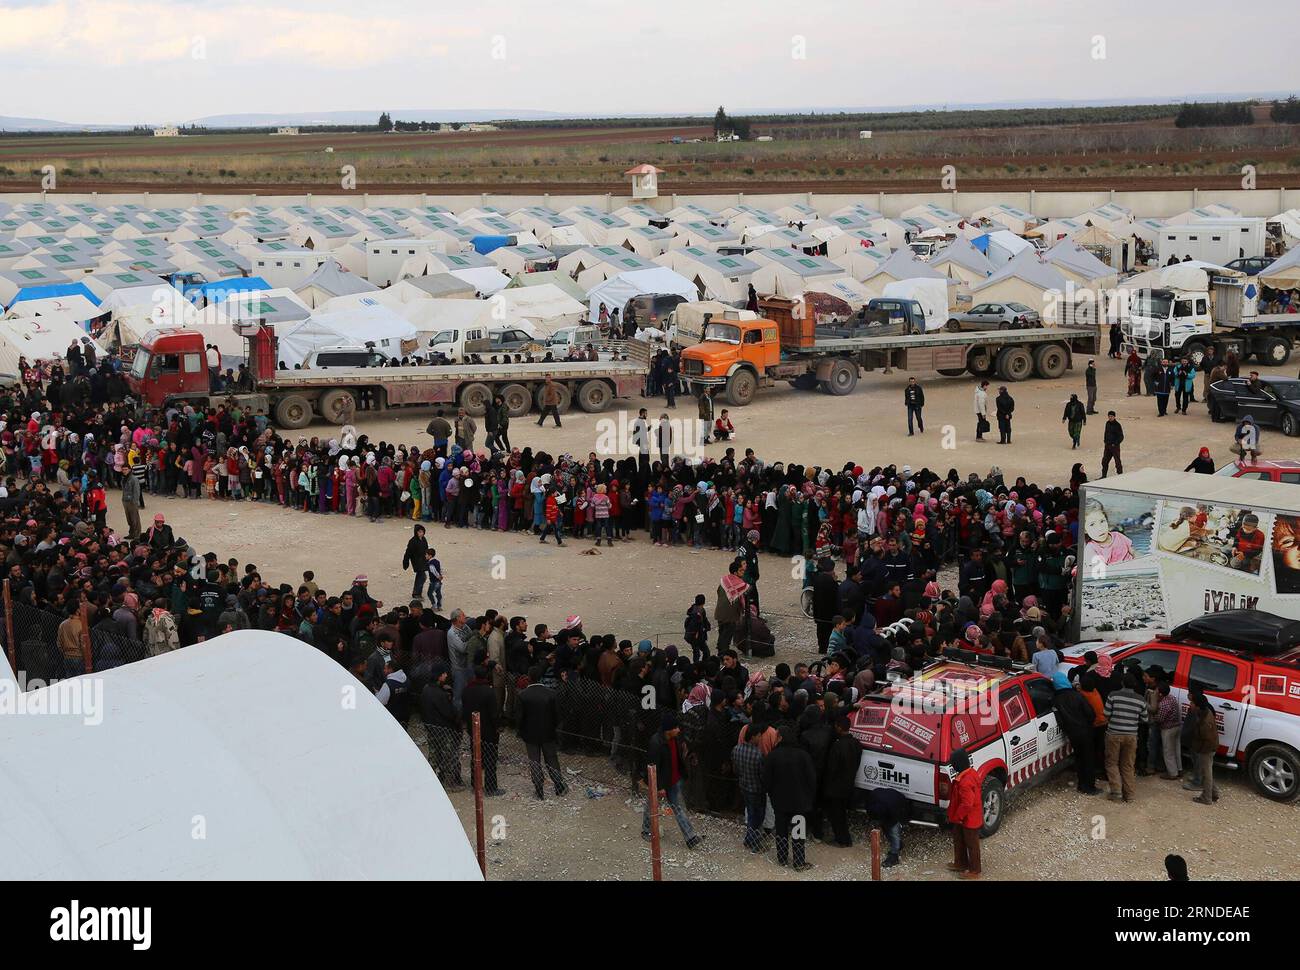 Photo taken on Feb. 10, 2016 shows a refugee camp in Kilis, Turkey. Kilis, a Turkish border city grappling with a population of Syrian refugees larger than its own, has high hopes for the first-ever World Humanitarian Summit slated for May 23-24 in Istanbul. ) TURKEY-REFUGEE ISSUE-WORLD HUMANITARIAN SUMMIT Cihan PUBLICATIONxNOTxINxCHN   Photo Taken ON Feb 10 2016 Shows a Refugee Camp in Kilis Turkey Kilis a Turkish Border City grappling With a Population of Syrian Refugees Larger than its Own has High Hopes for The First Ever World Humanitarian Summit slated for May 23 24 in Istanbul Turkey Re Stock Photo